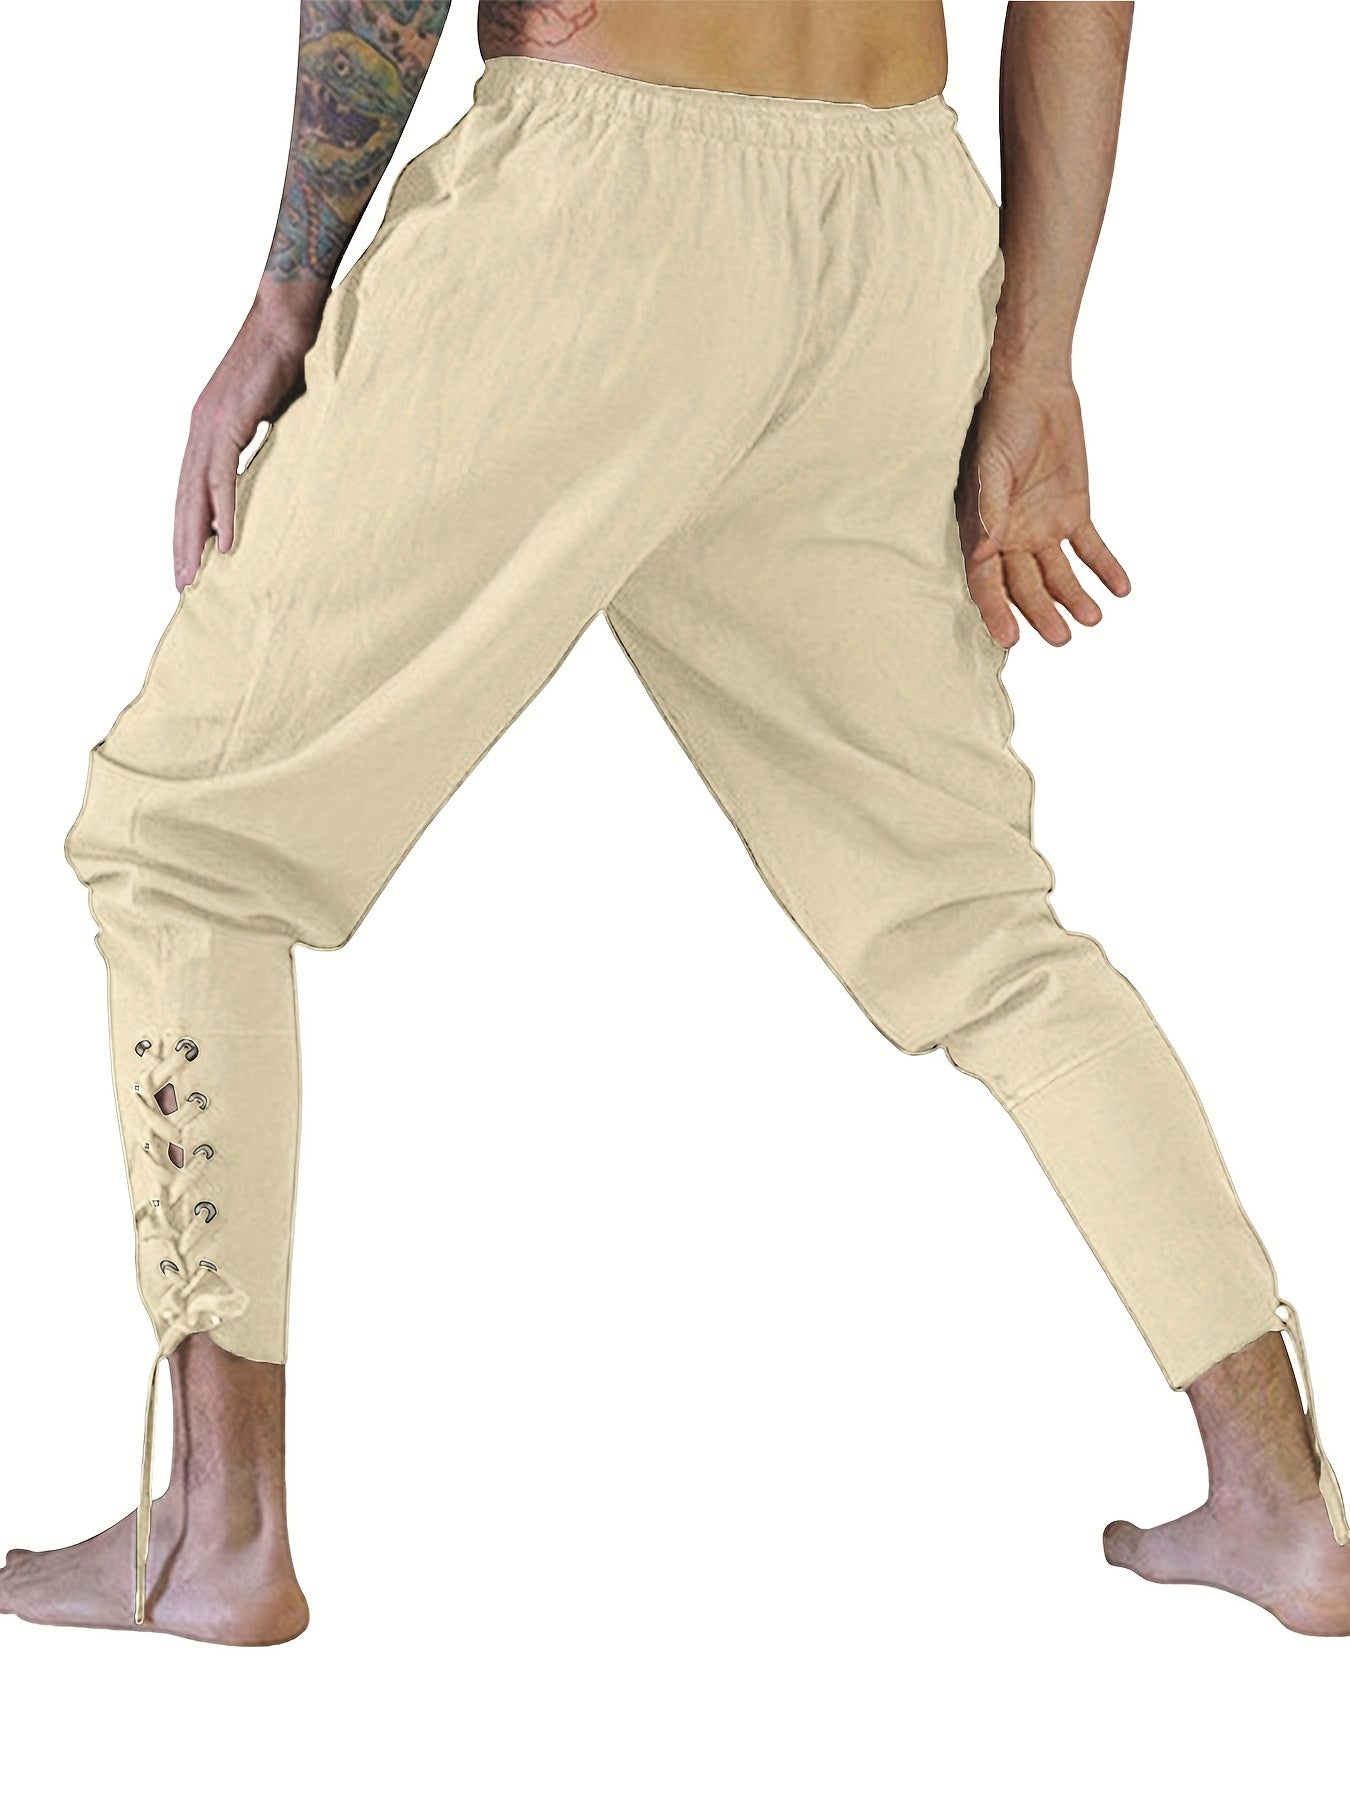 Men's Retro Medieval Renaissance Lace Up Loose Trousers Pants Costume Halloween Party Pirate Cosplay